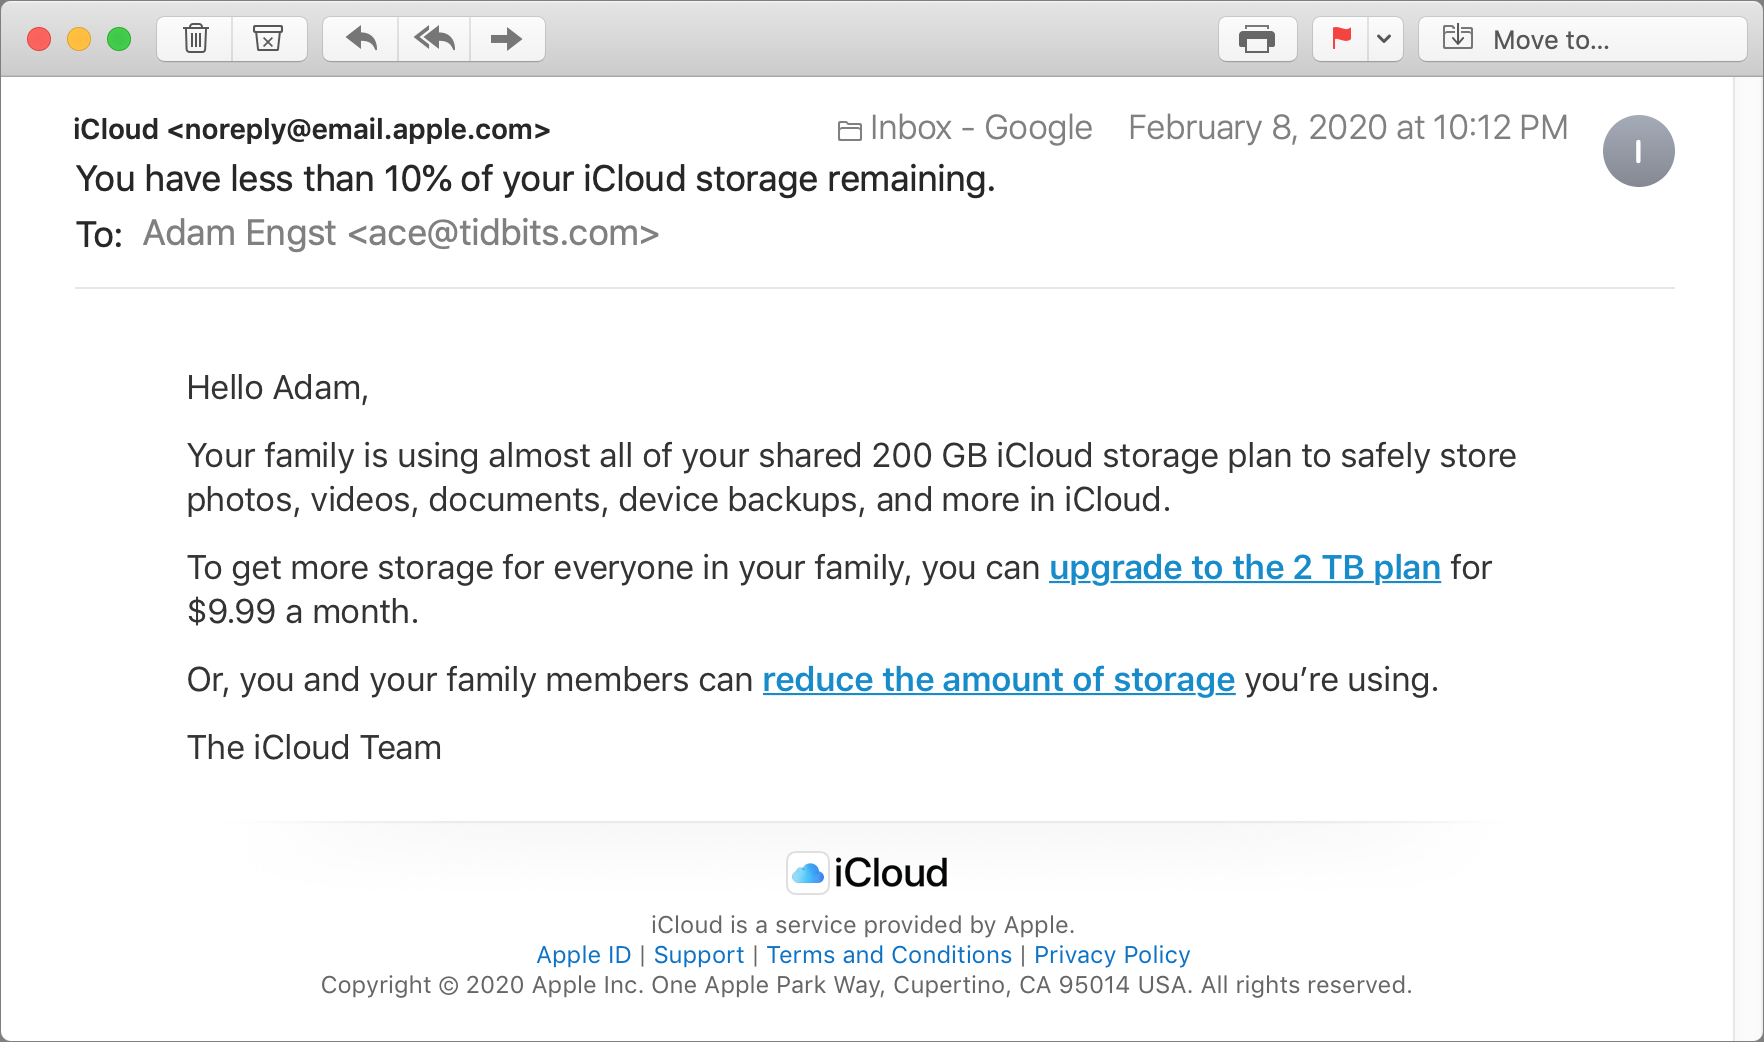 iCloud Login : – How to icloud email login to iCloud for Backup of Data and  Sync